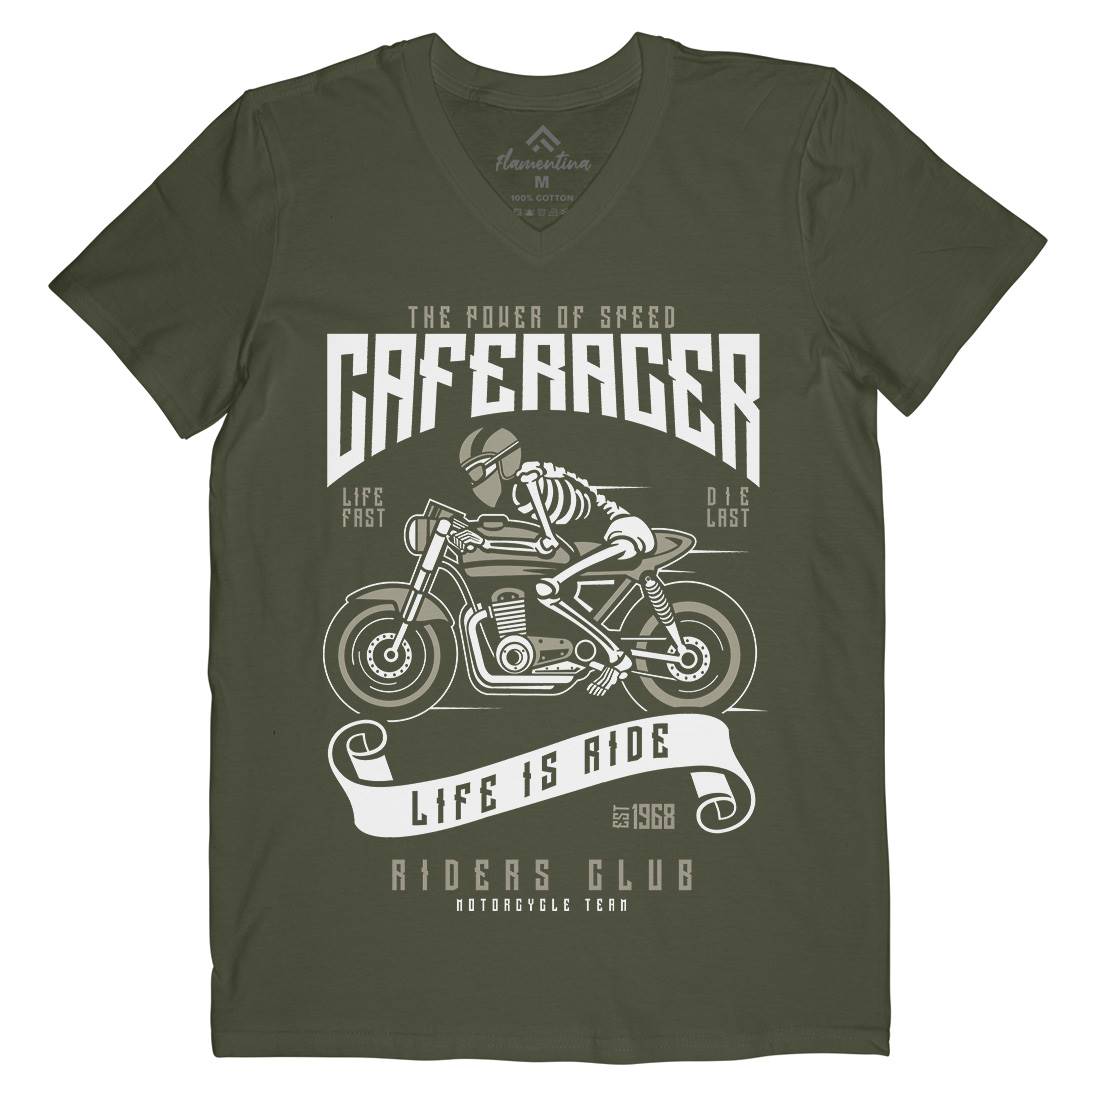 Speed Of Caferacer Mens Organic V-Neck T-Shirt Motorcycles A154